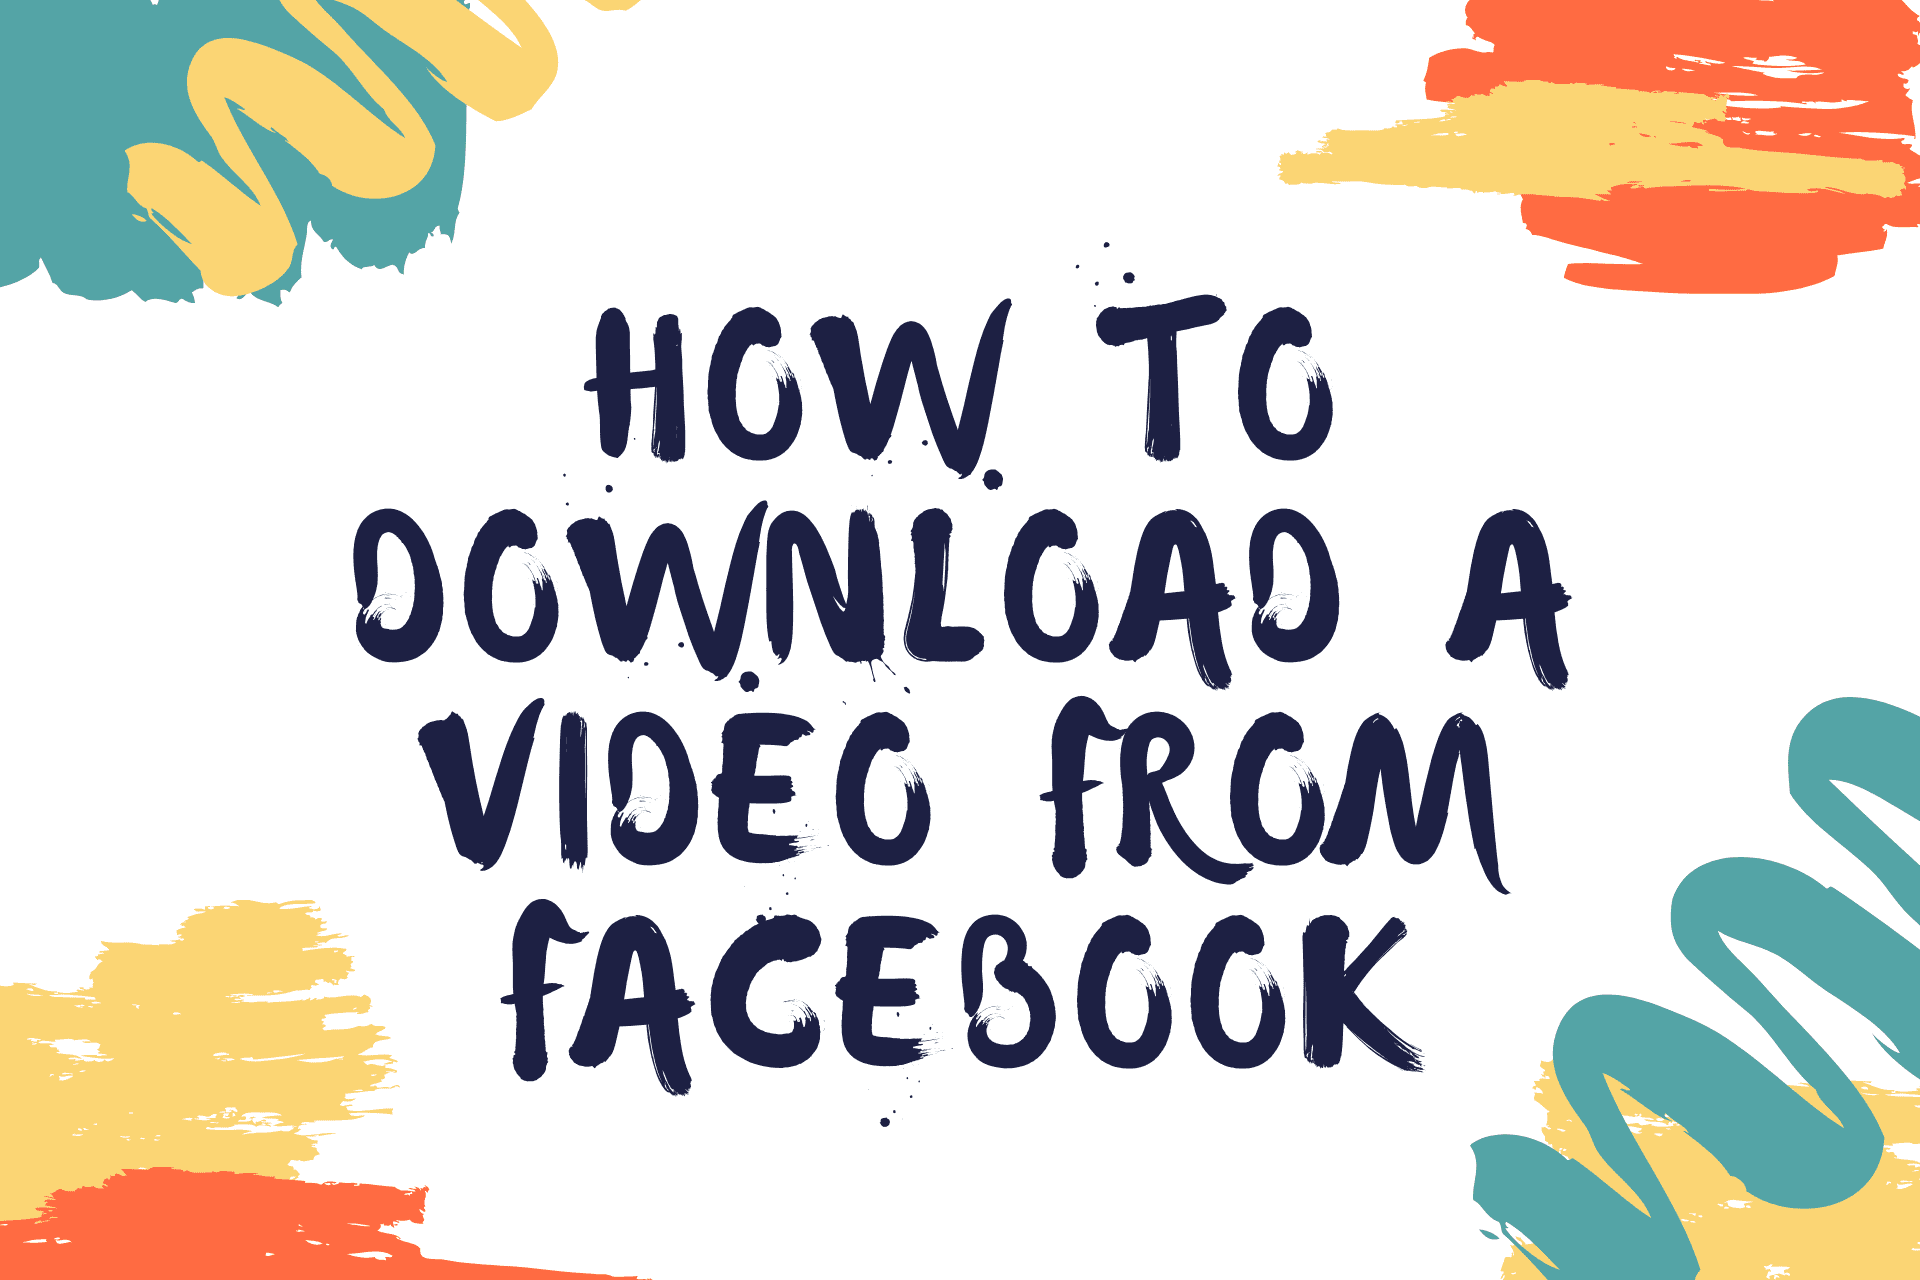 How To Download a Video From Facebook